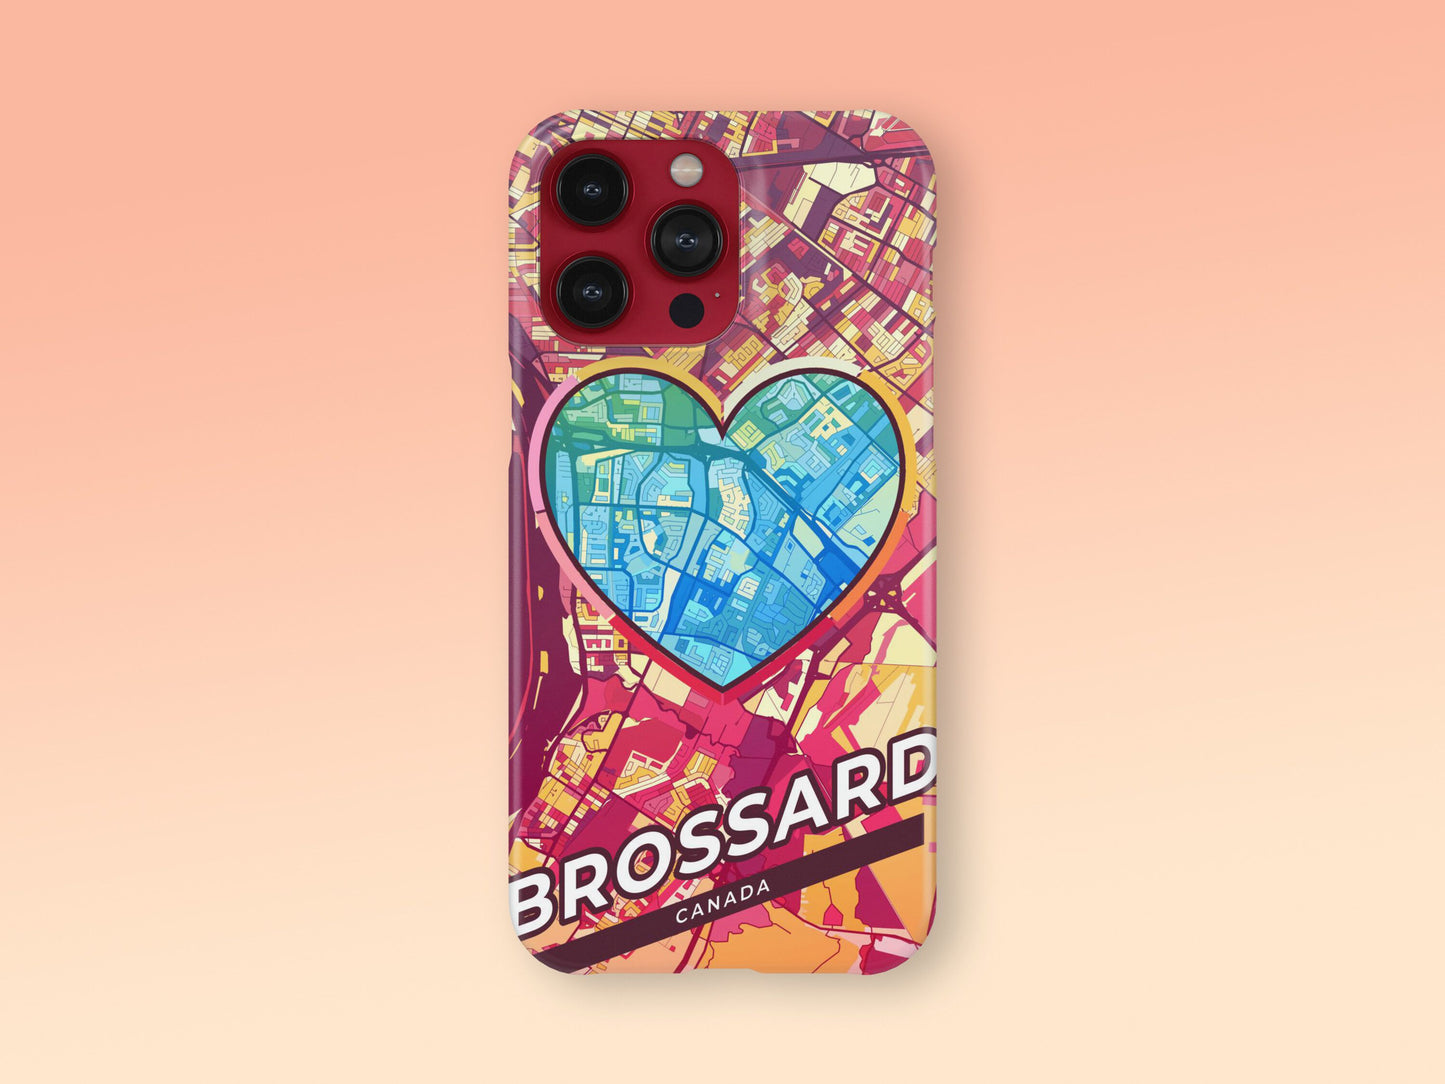 Brossard Canada slim phone case with colorful icon. Birthday, wedding or housewarming gift. Couple match cases. 2